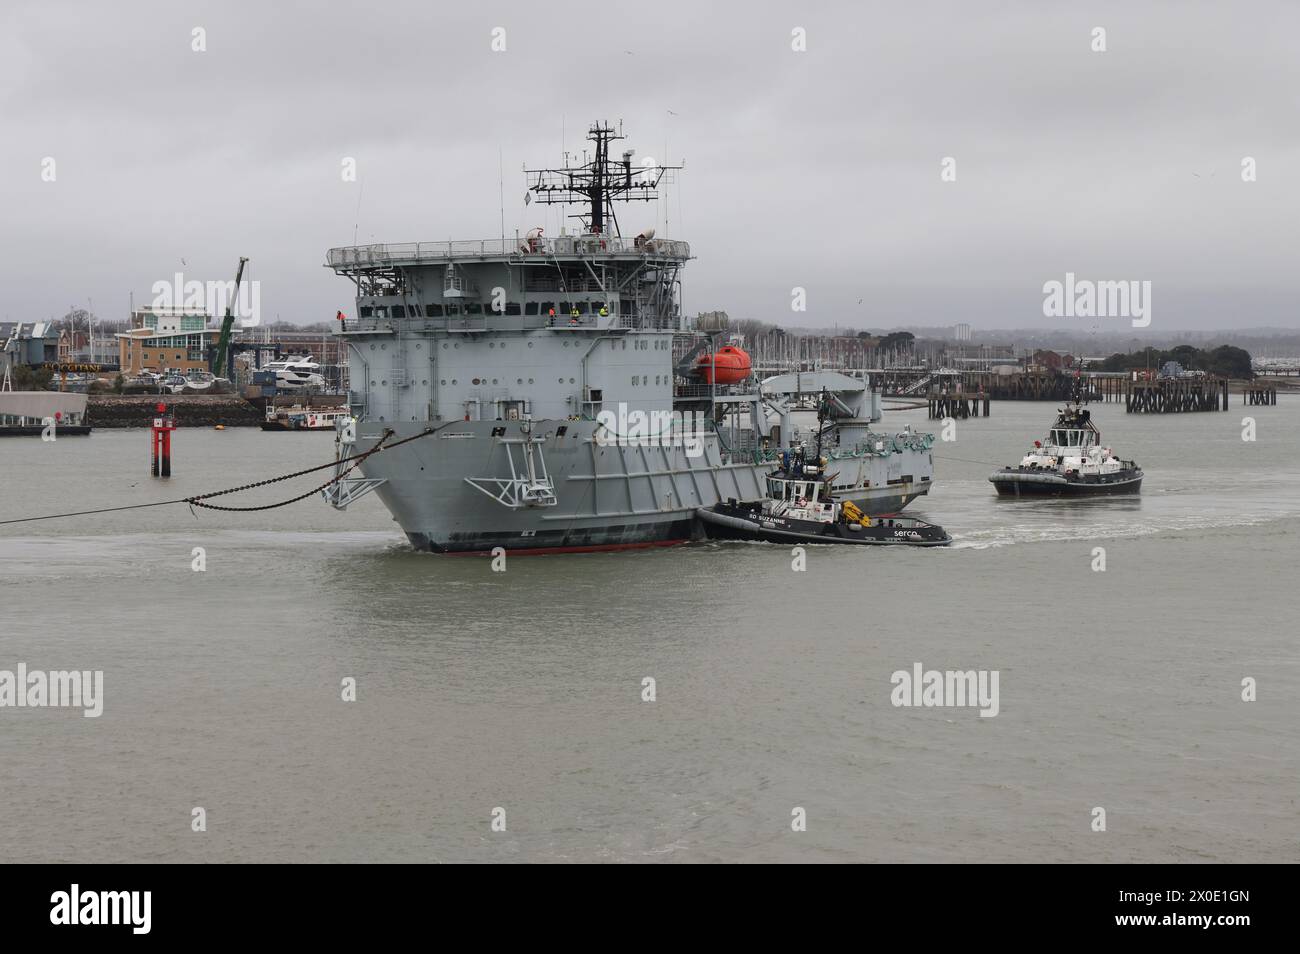 Tugs assist the decommissioned Royal Fleet Auxiliary repair ship DILIGENCE as it is towed out of harbour to a Turkish breaker’s yard Stock Photo